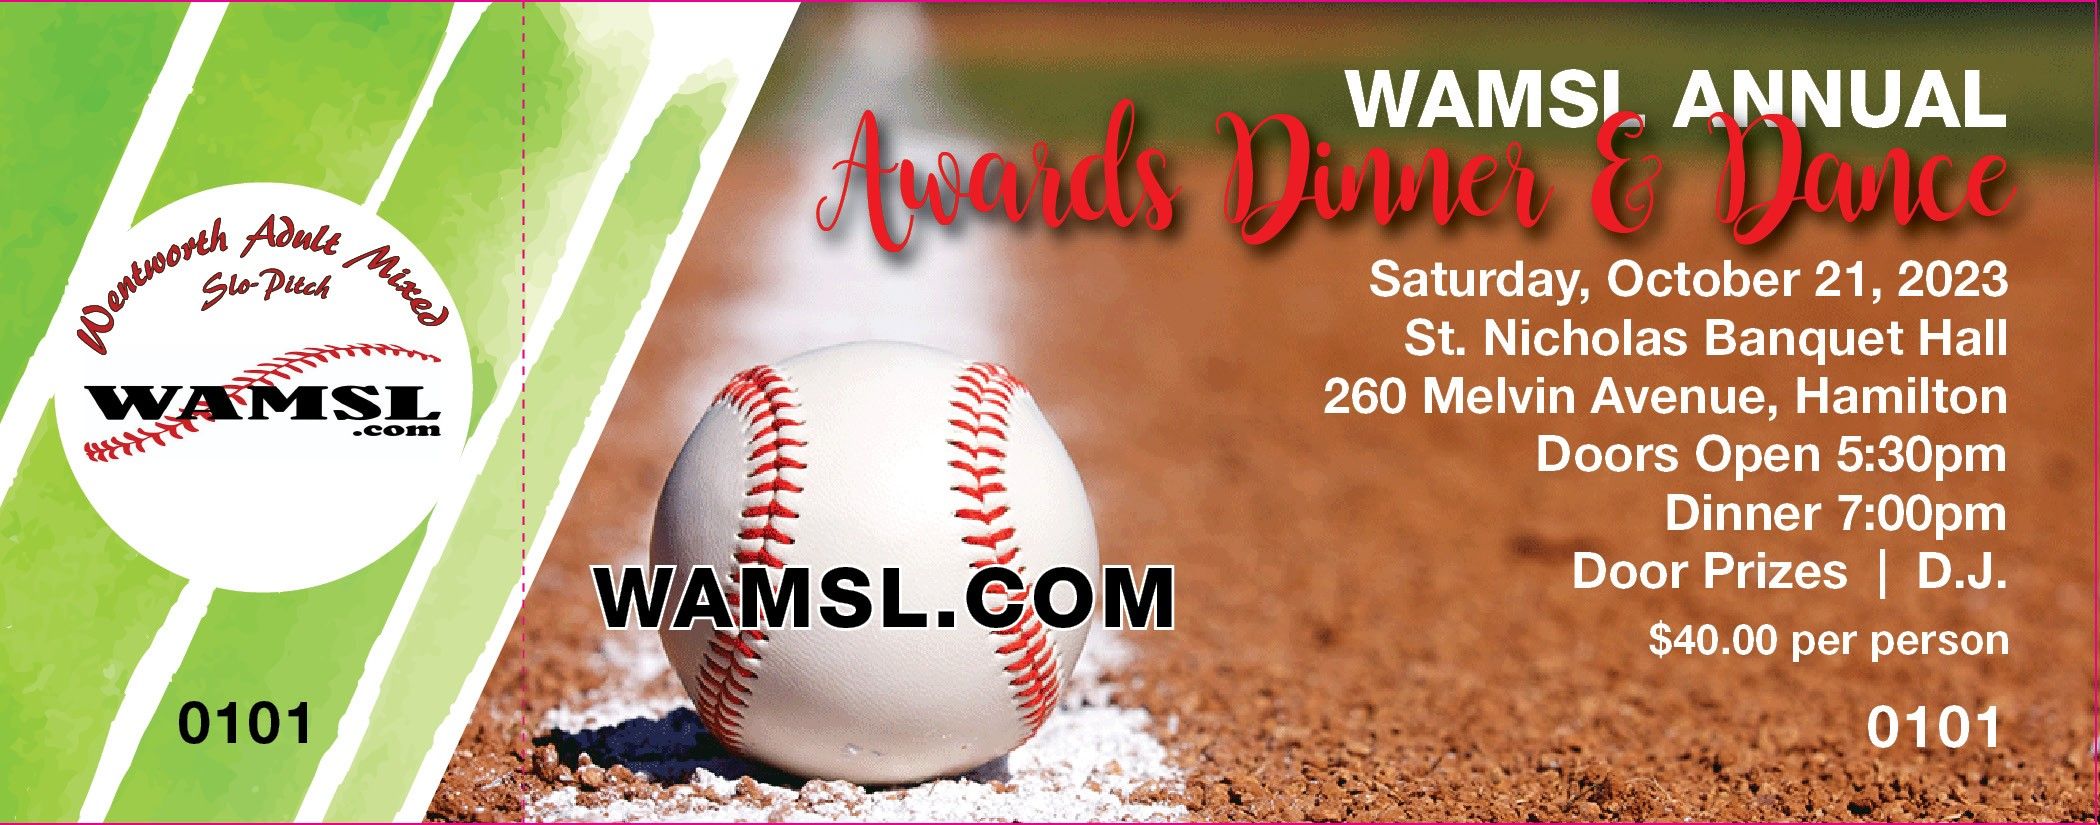 WAMSL 2022 Awards Dinner & Dance - Registration (2 tickets per team) -(Additional Team Tickets Are For Sale @ $40.00 per person) - Contact Linda info@wamsl.com 